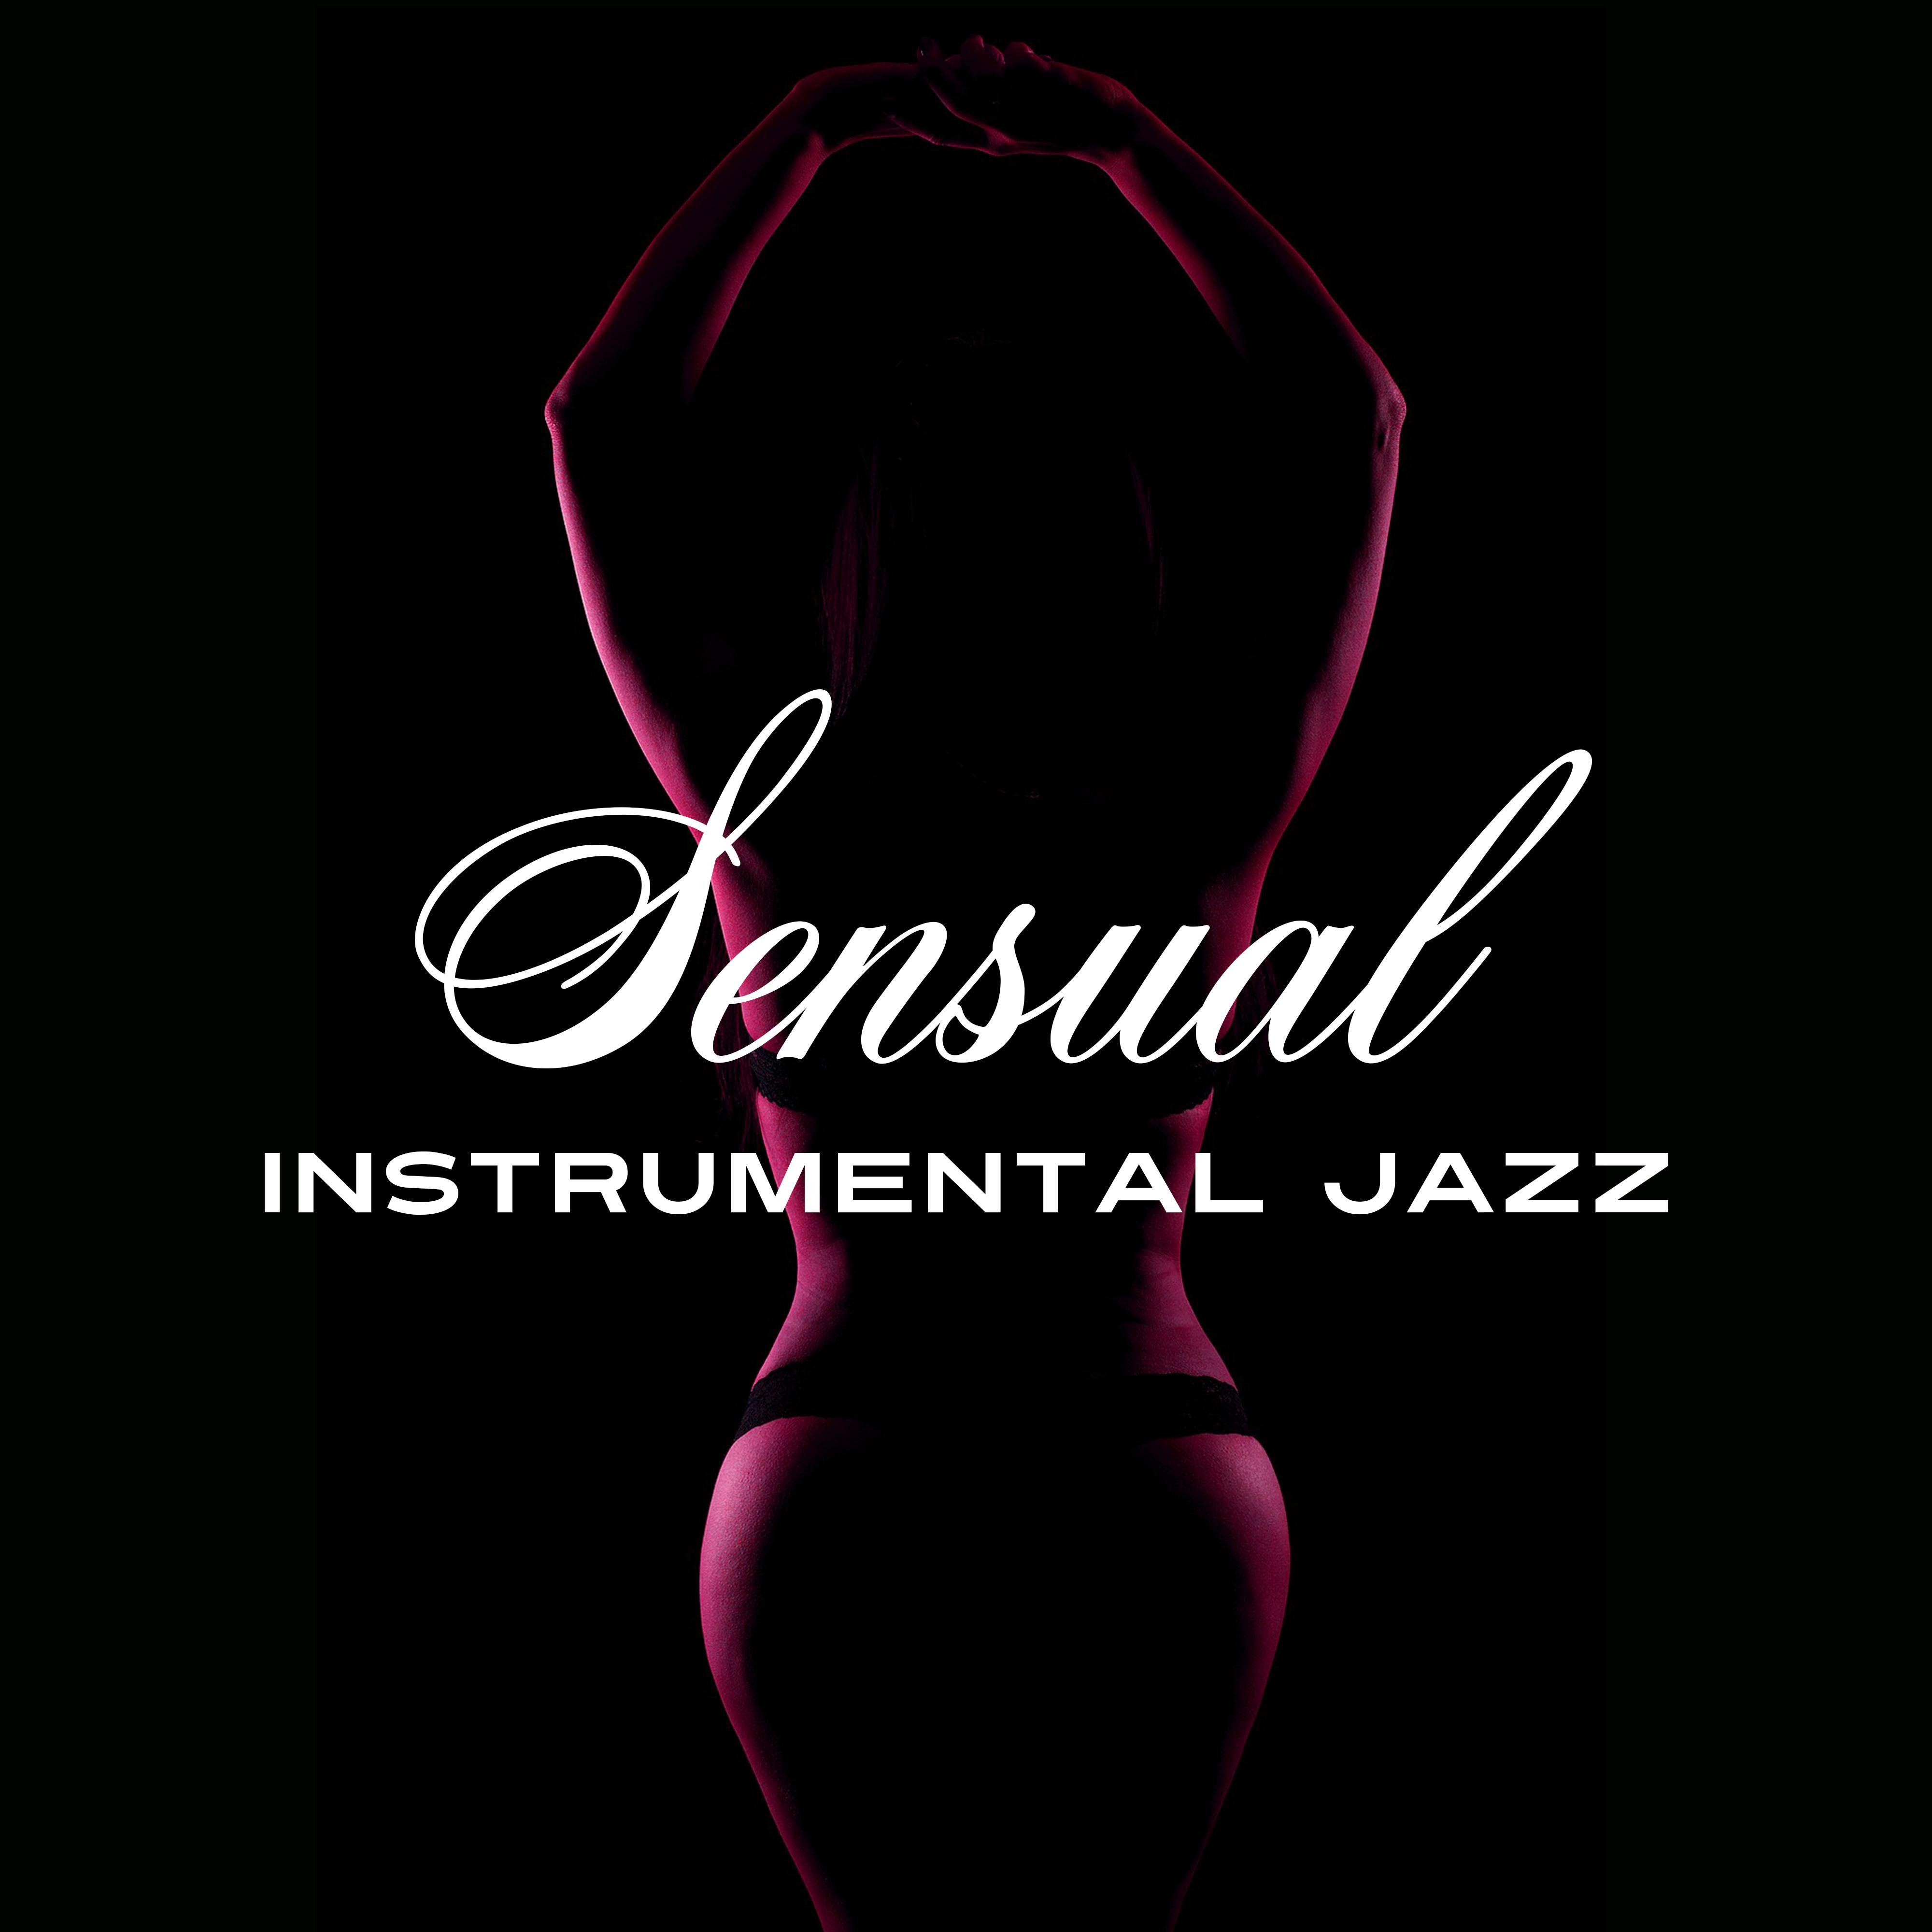 Sensual Instrumental Jazz  Calming Jazz, Romantic Date, Jazz Music for Lovers, Chilled Waves